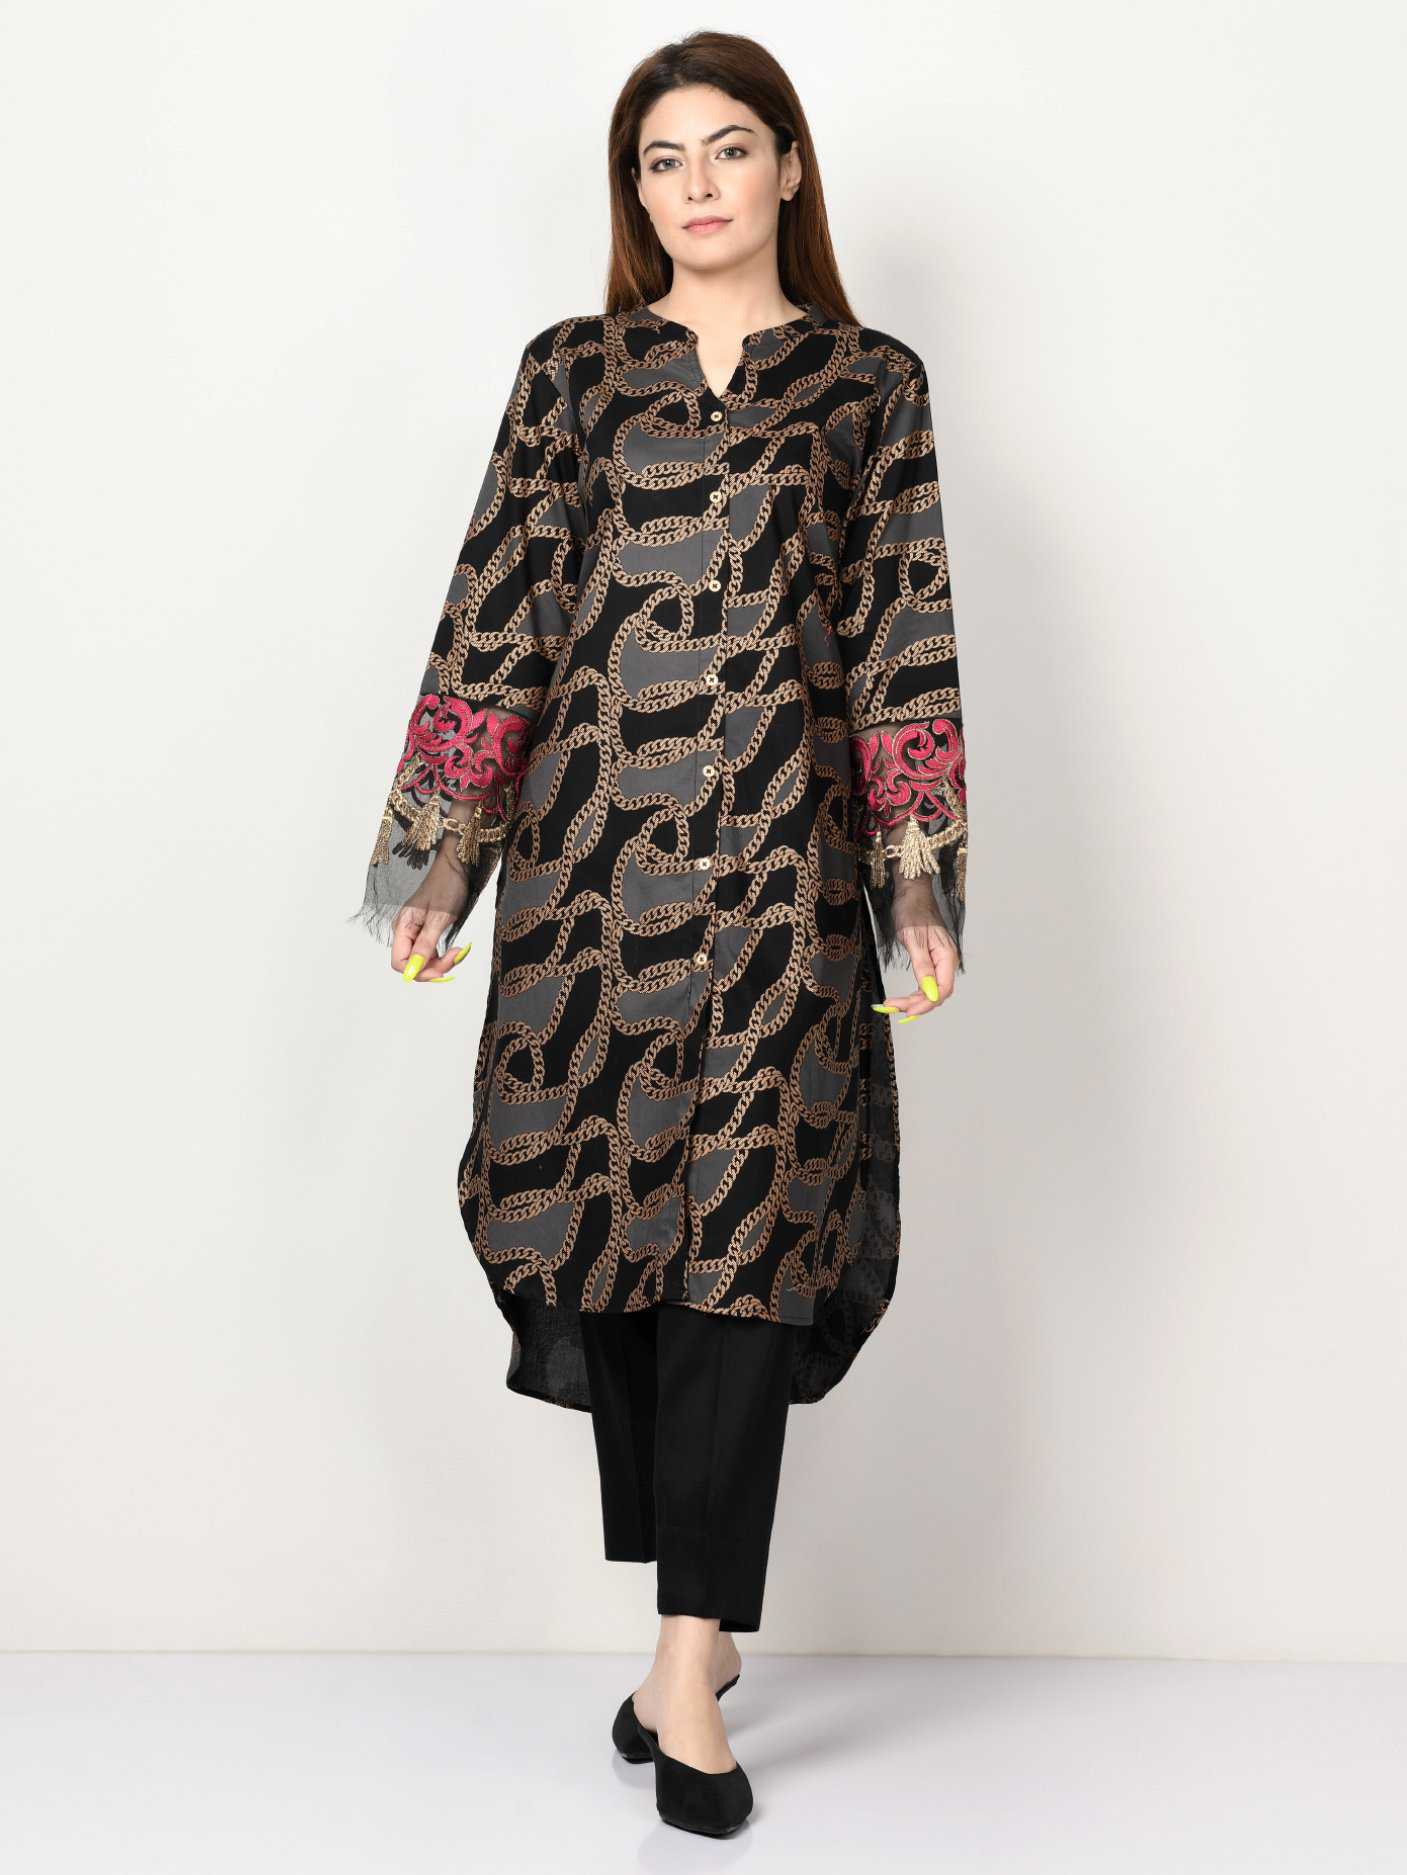 Limelight Embroidered Winter Cotton Shirt P1626-BLK 2019 | Limelight Sale 2020